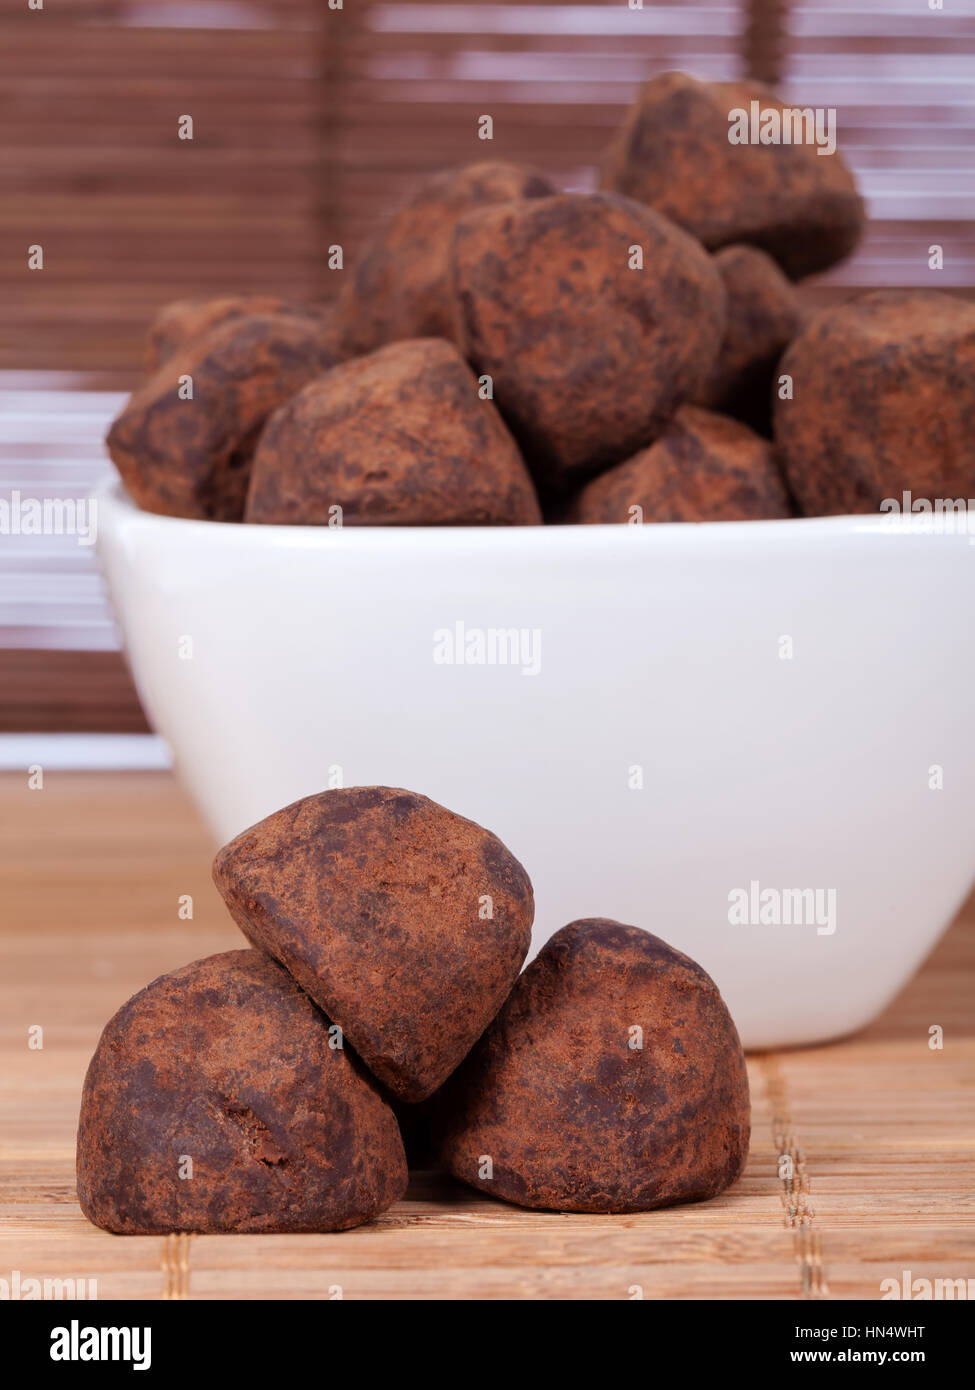 Black chocolate truffles in a white bowl covered with cinnamon powder Stock Photo